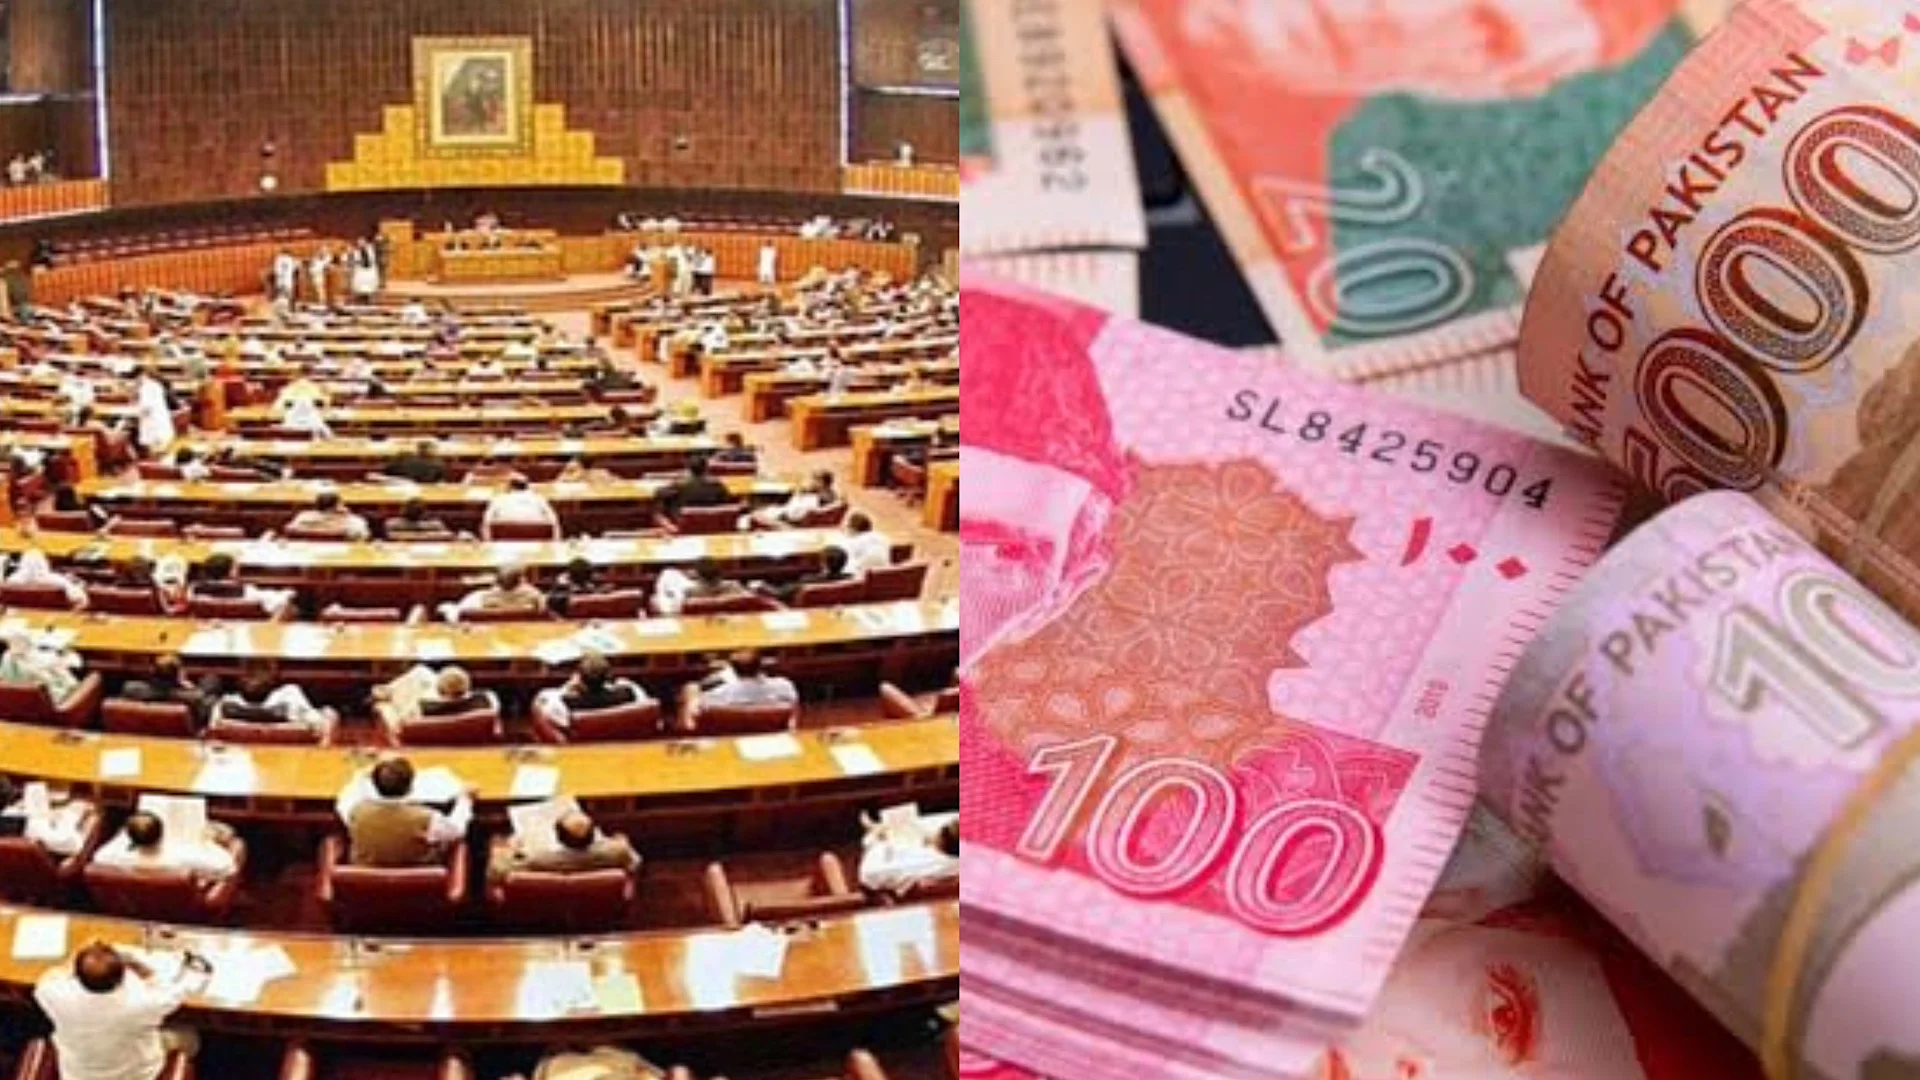 How much is spent on each national assembly session in Pakistan?